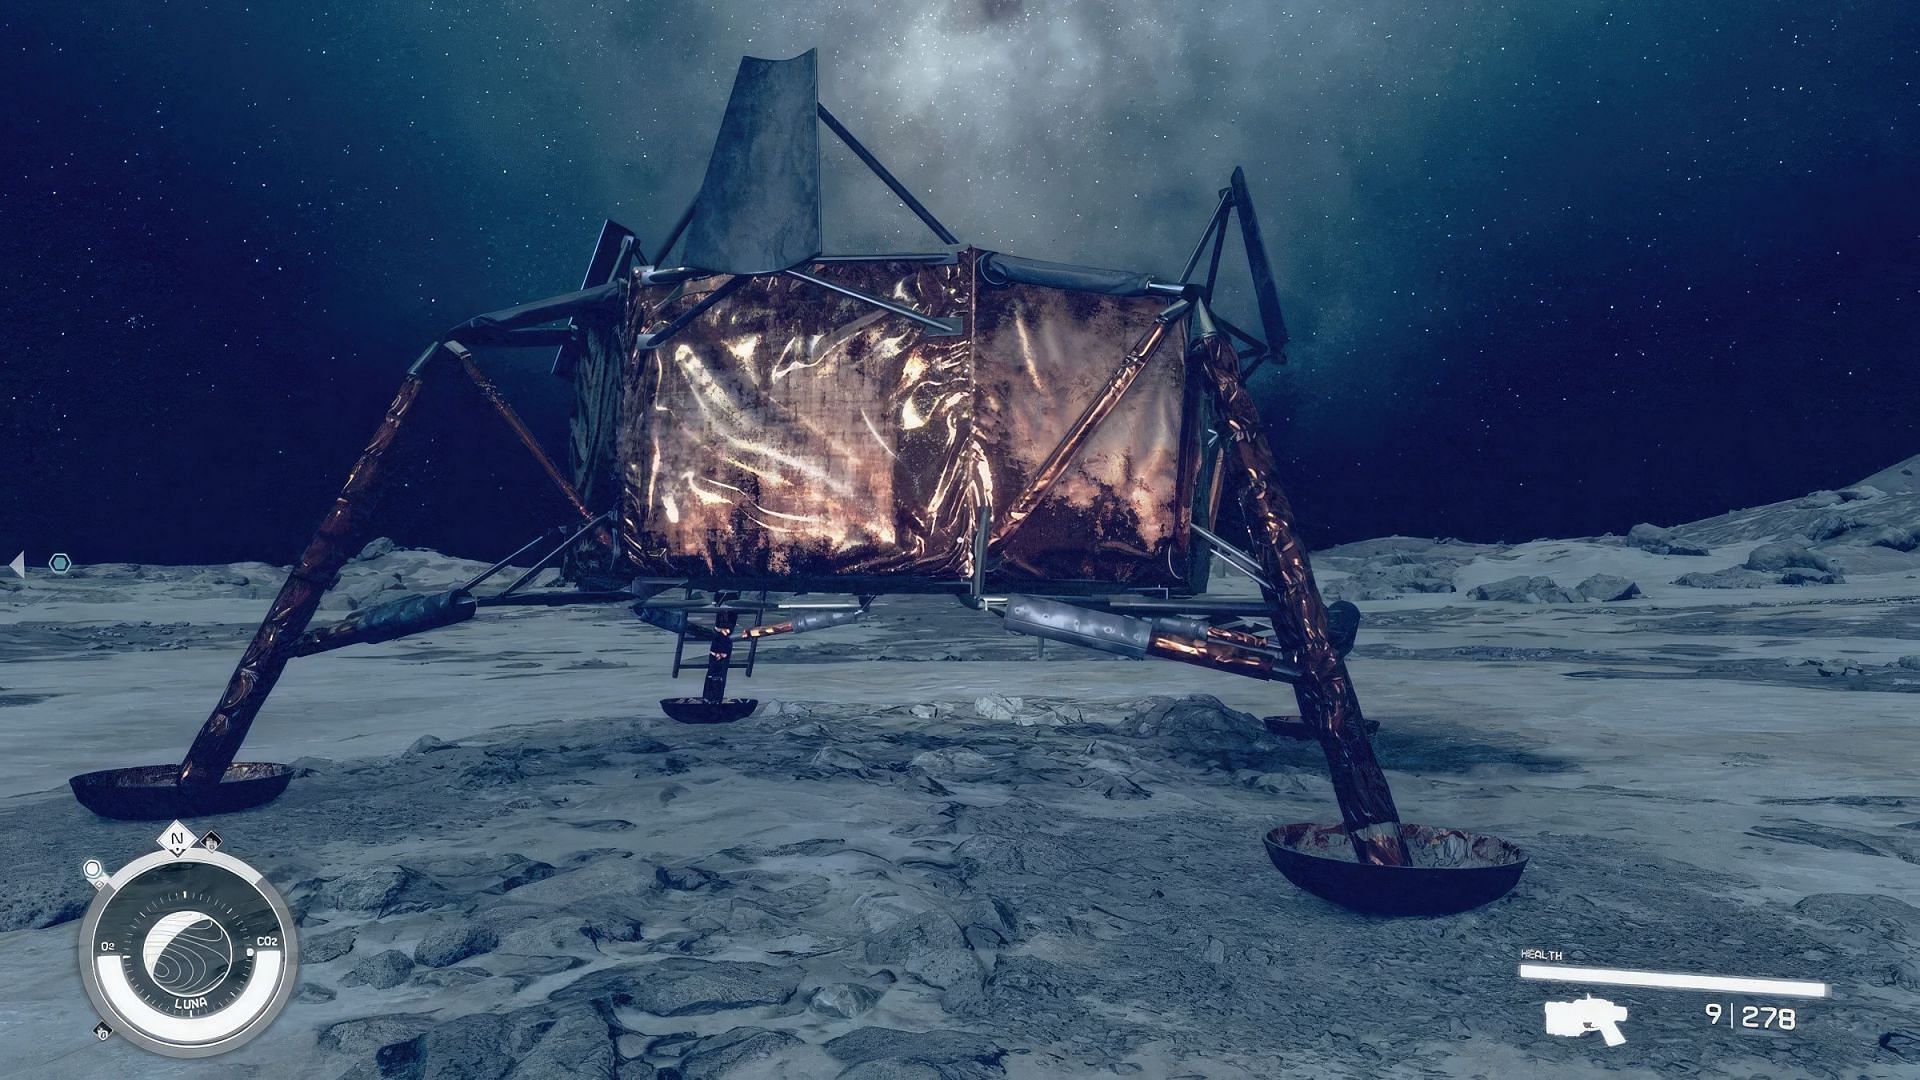 Spacecraft at the Apollo moon landing site in the game (Image via Bethesda)